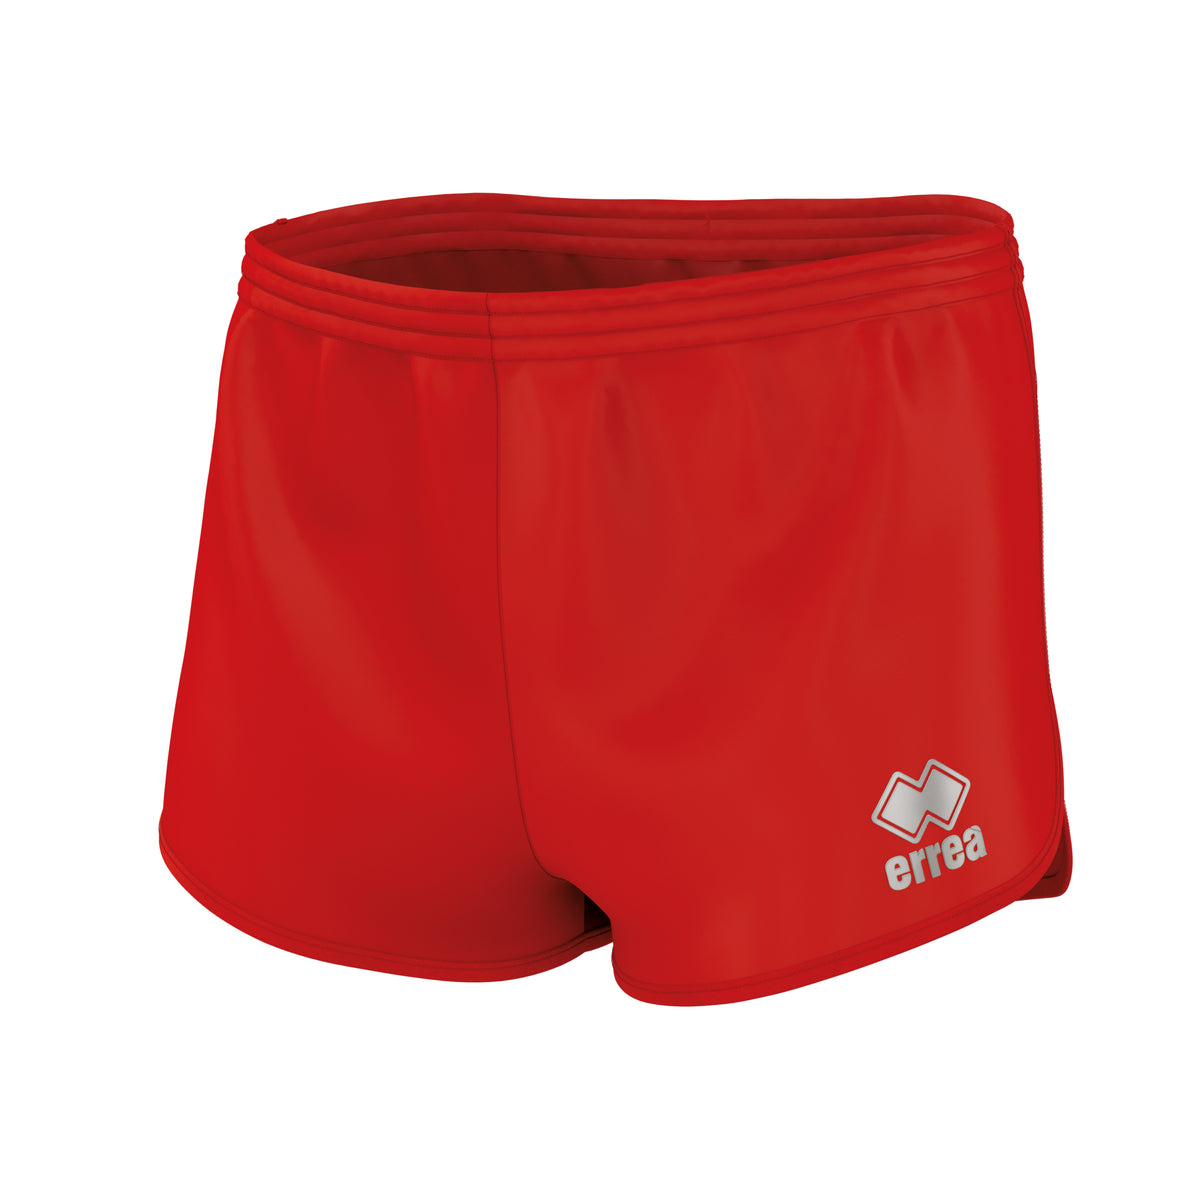 Meyer Shorts in Adult